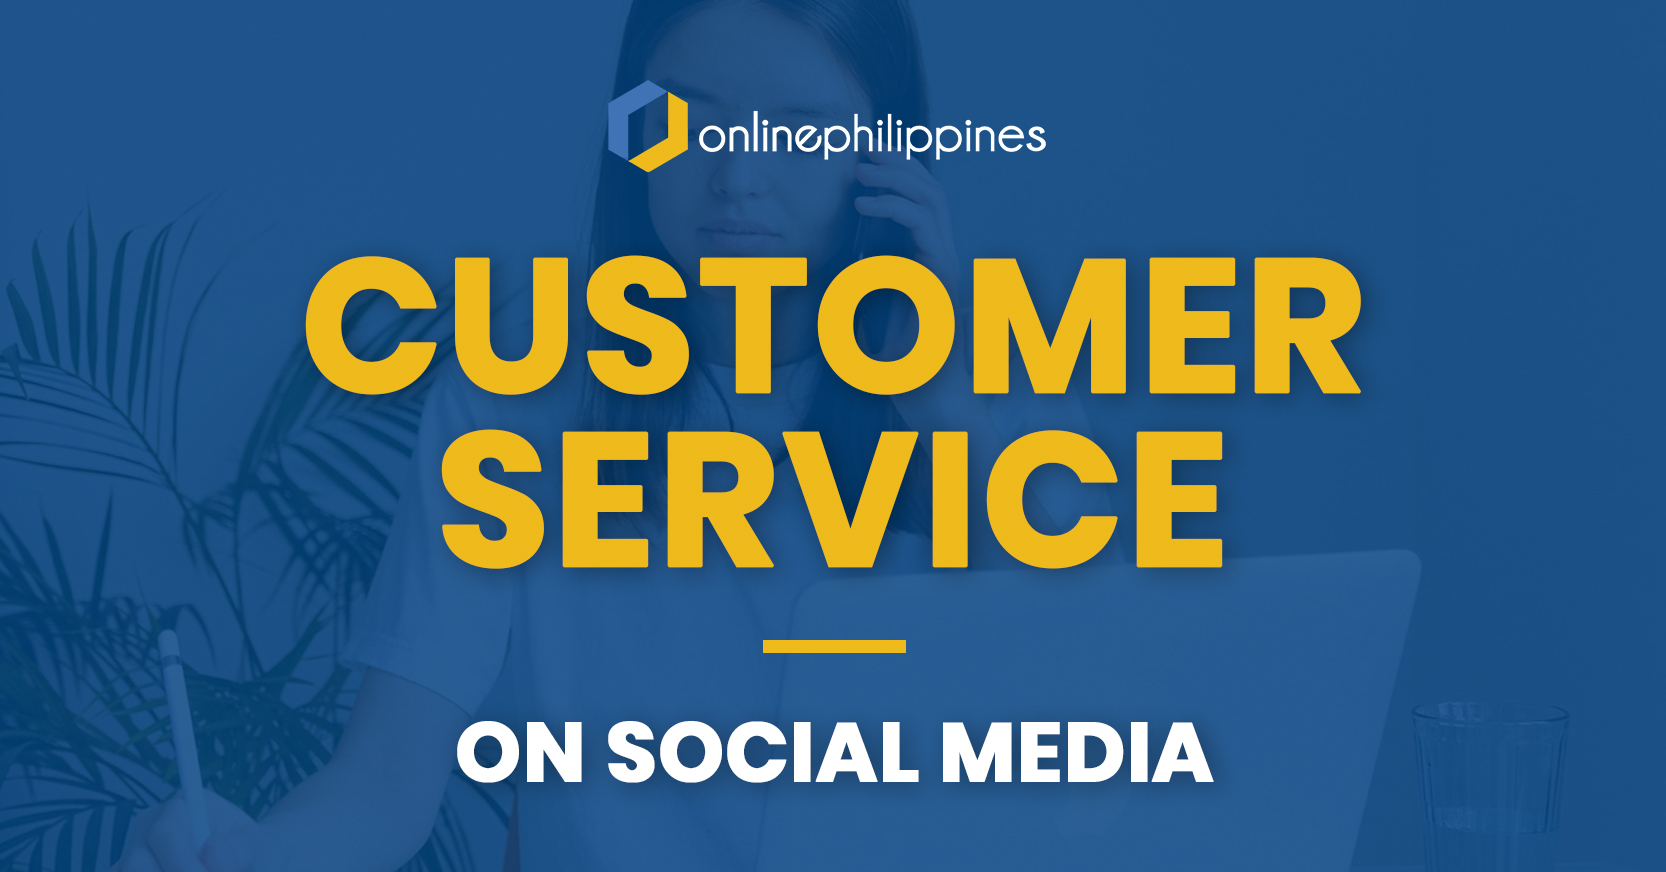 how to handle customer complaints on social media